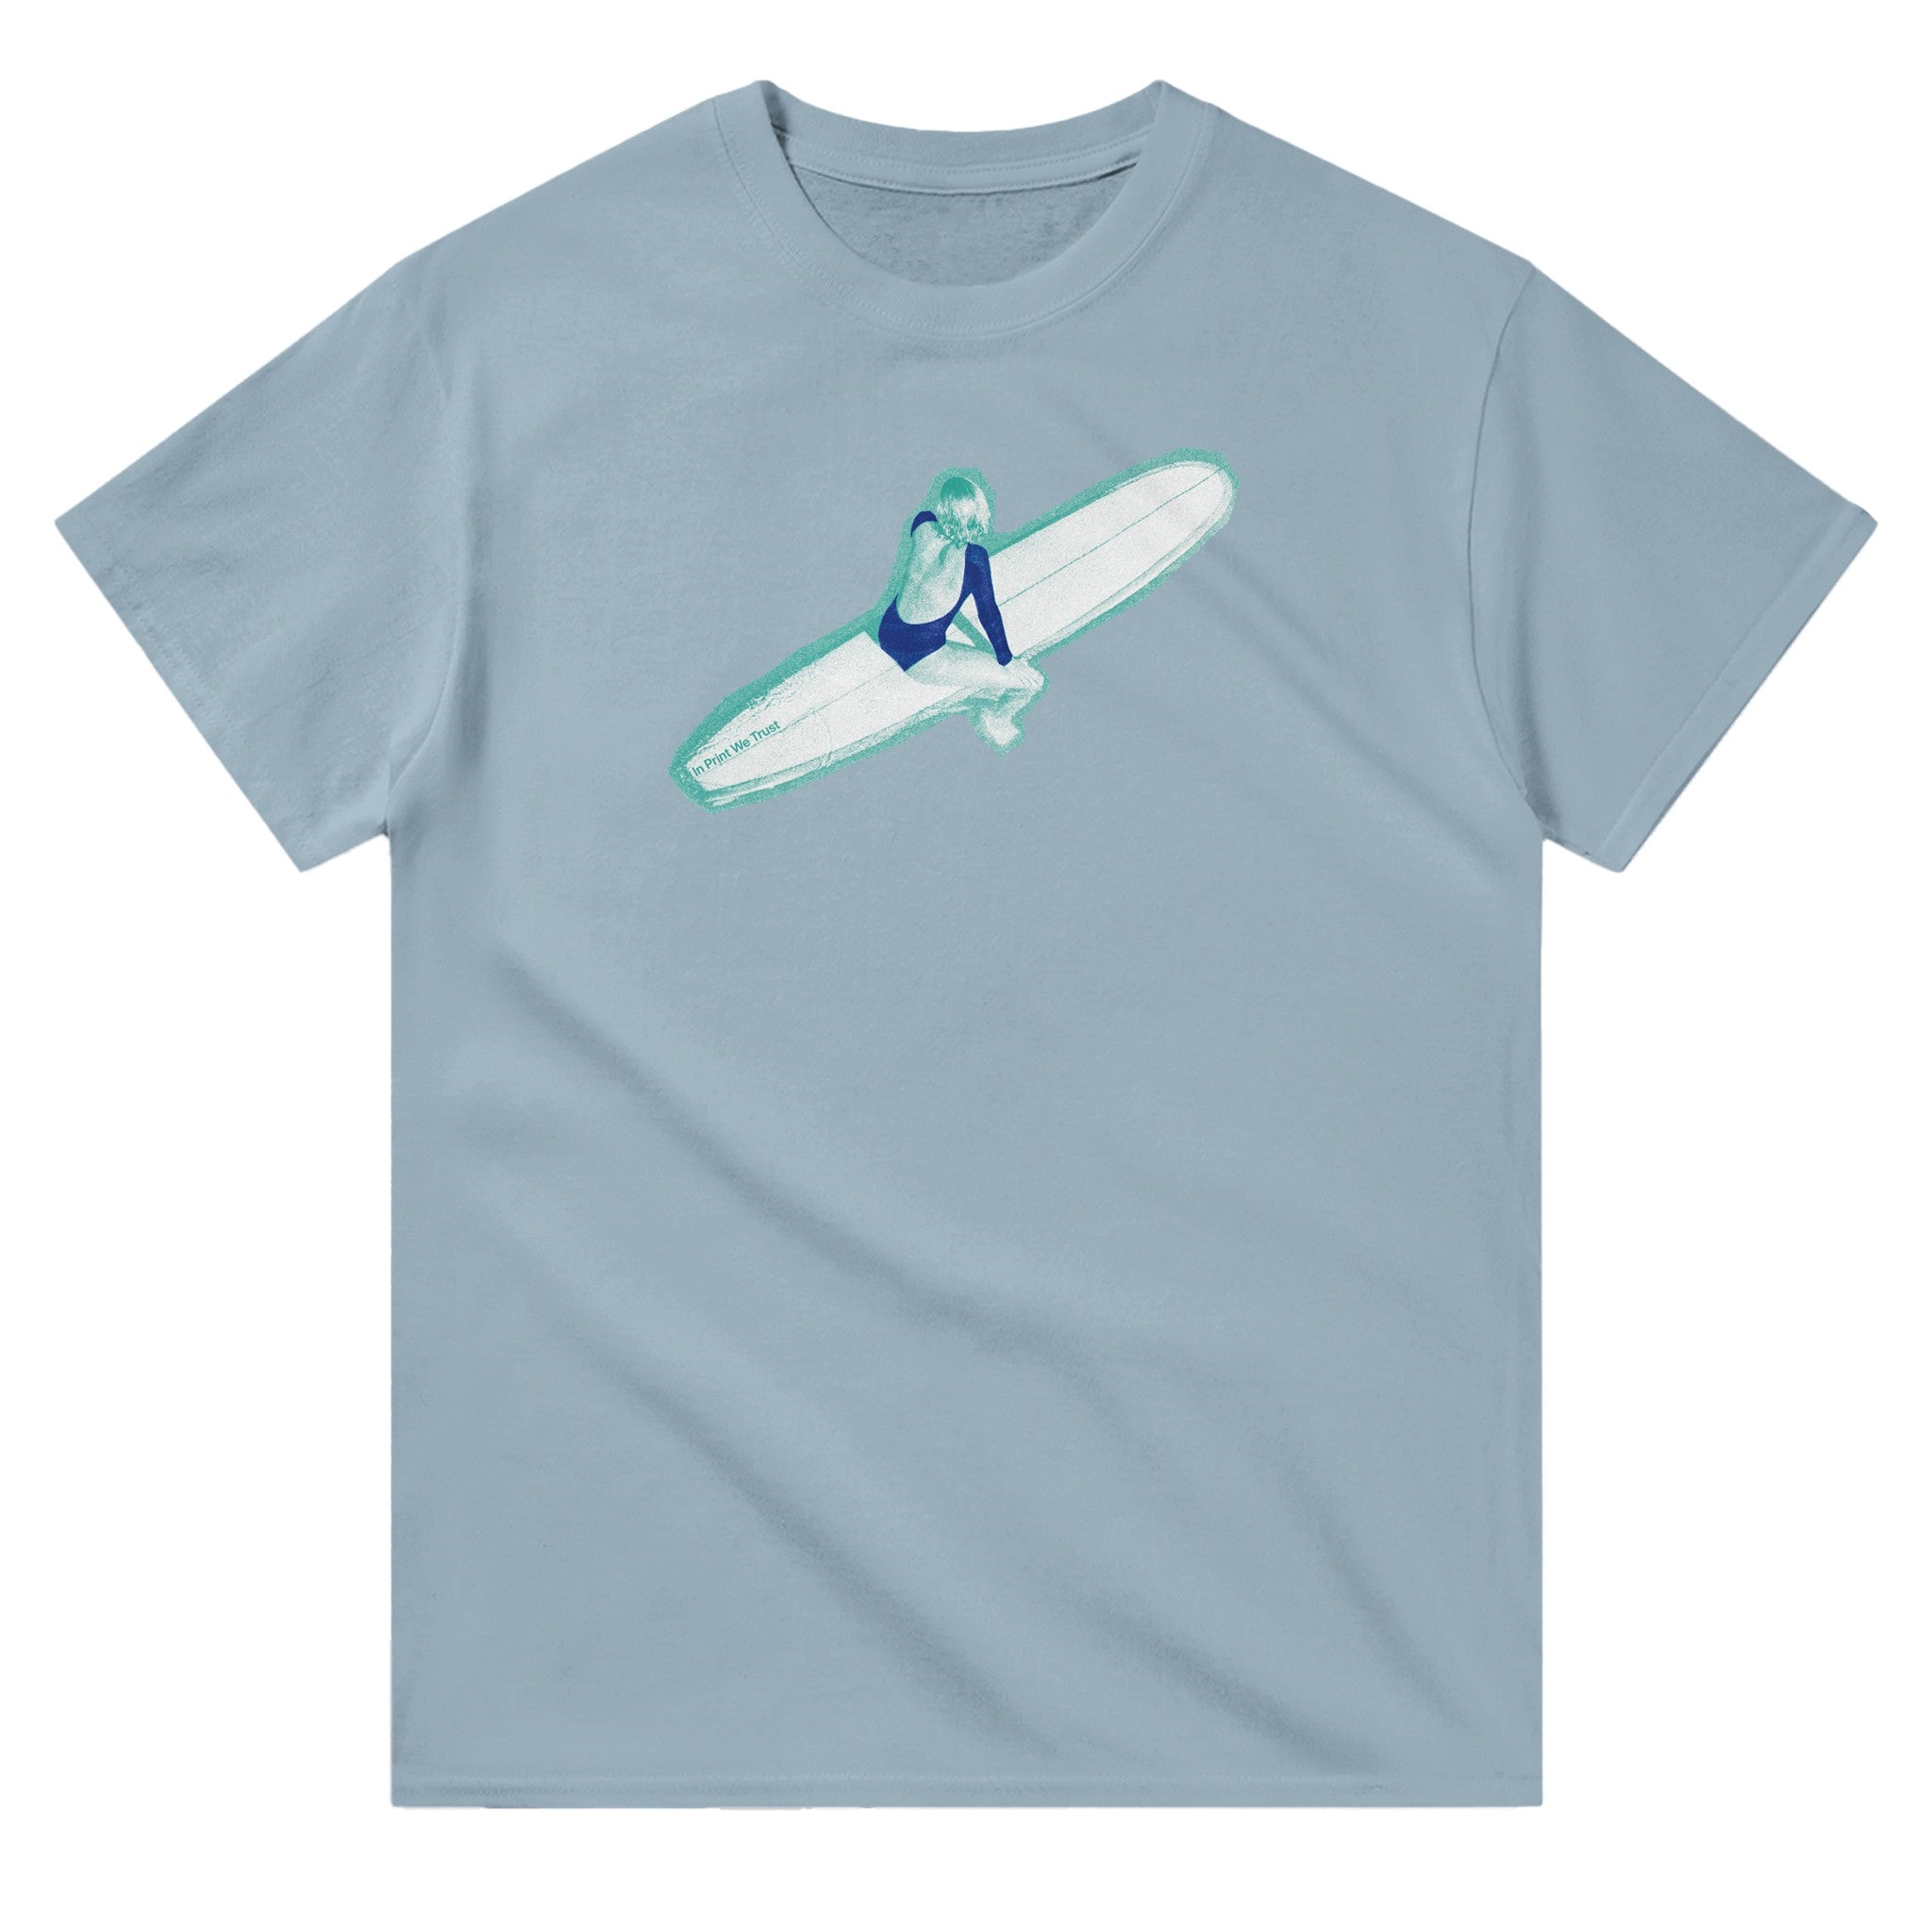 'Surf's Up' classic tee - In Print We Trust